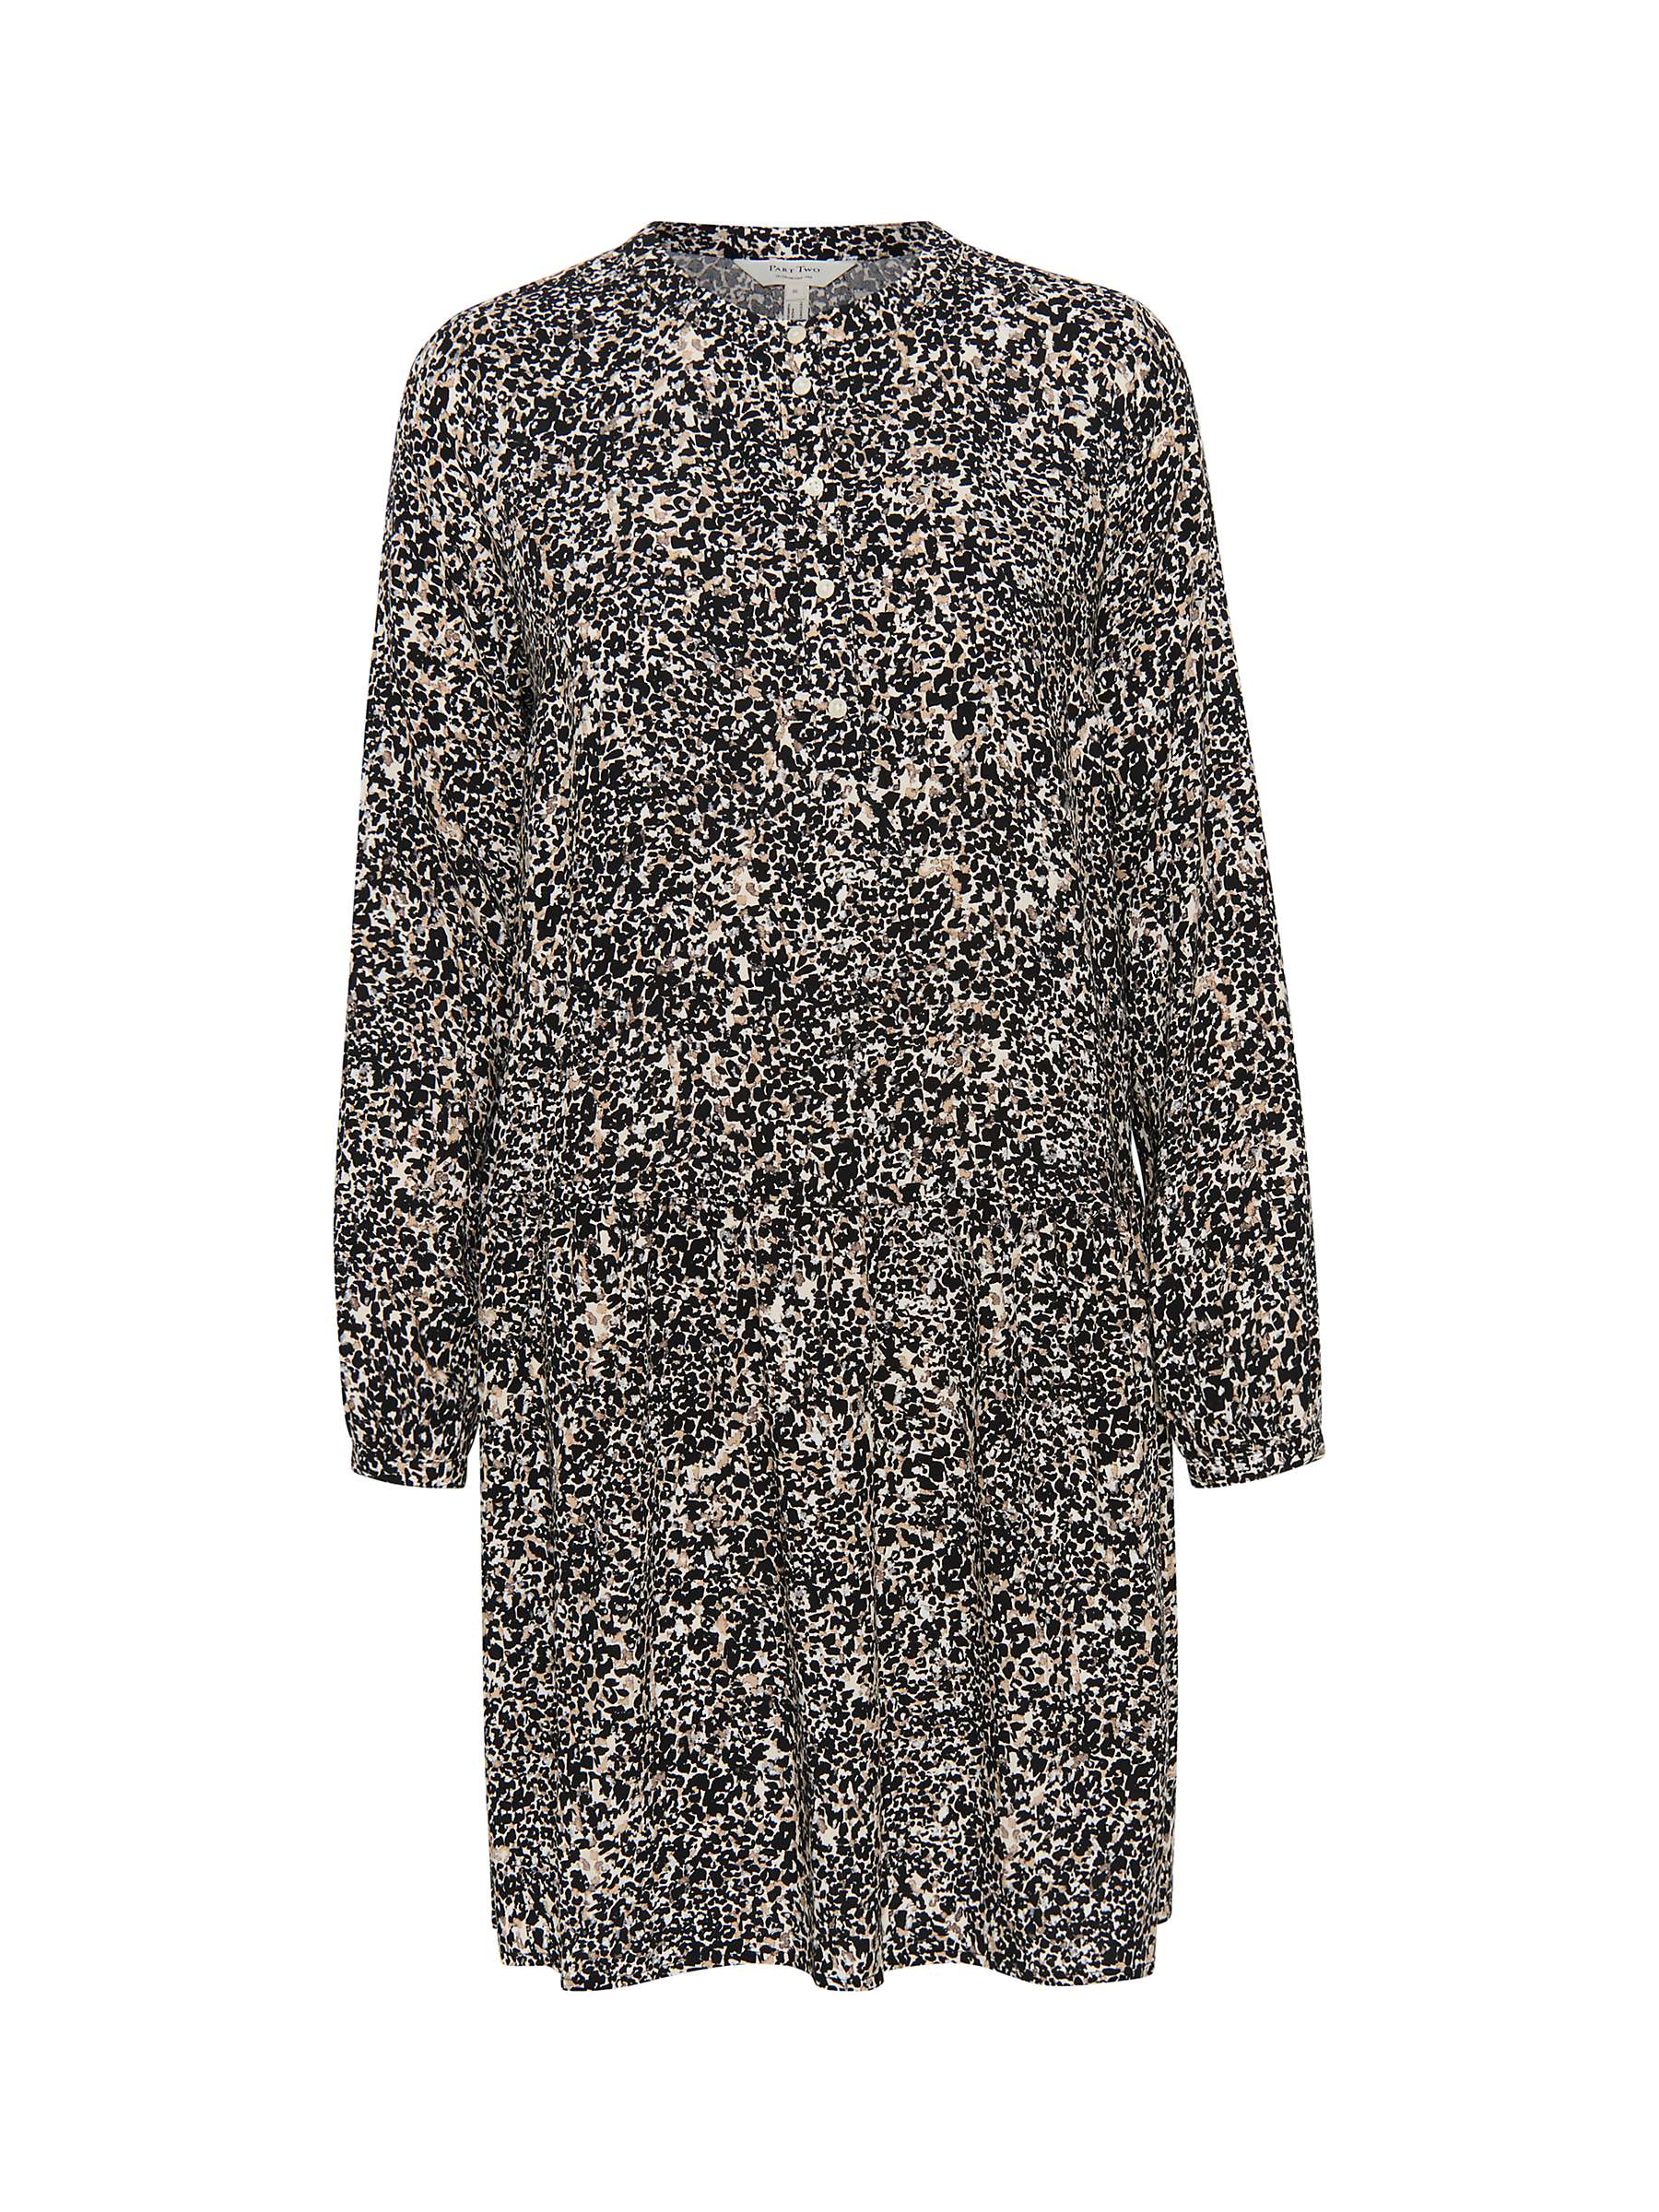 Buy Part Two Allie Abstract Relaxed Fit Knee Length Dress, Multi Online at johnlewis.com